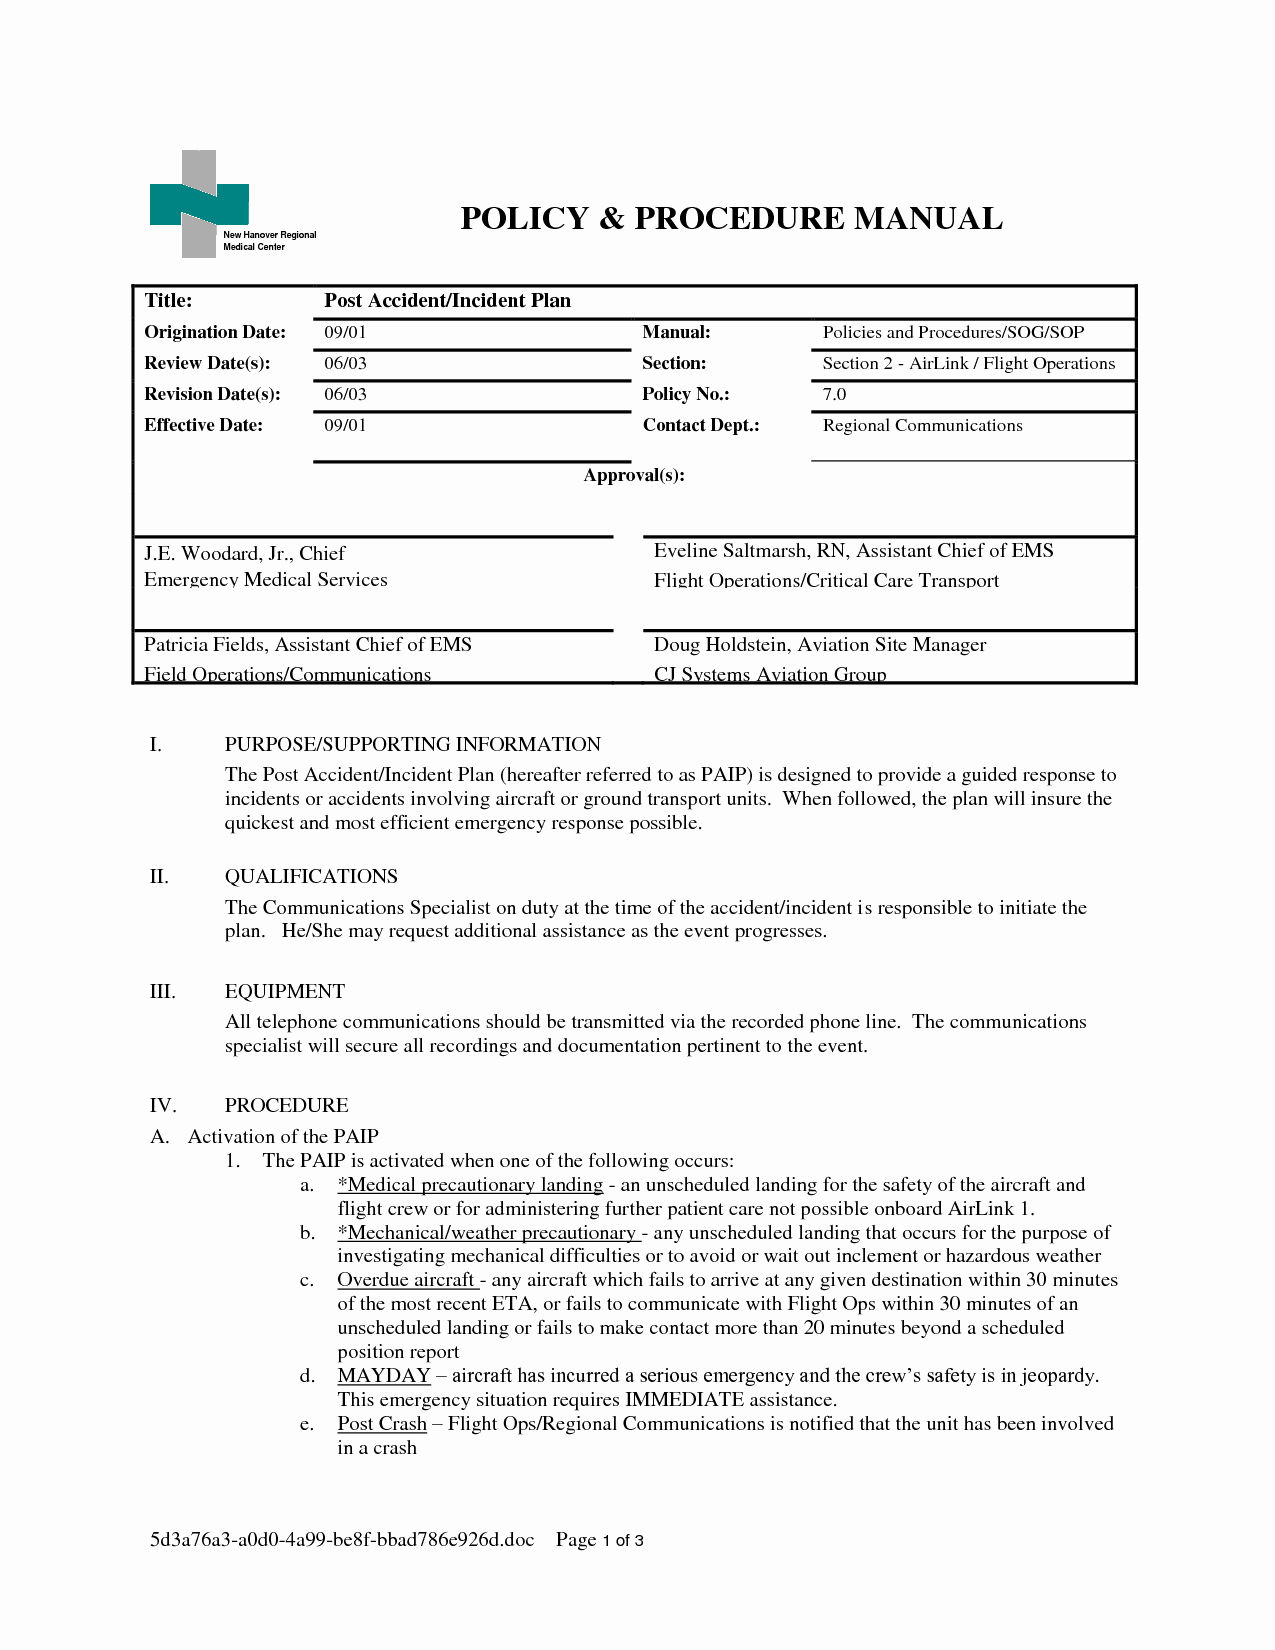 Policy and Procedure Manual Template Free Download Awesome 29 Of Policies and Procedures Manual Template